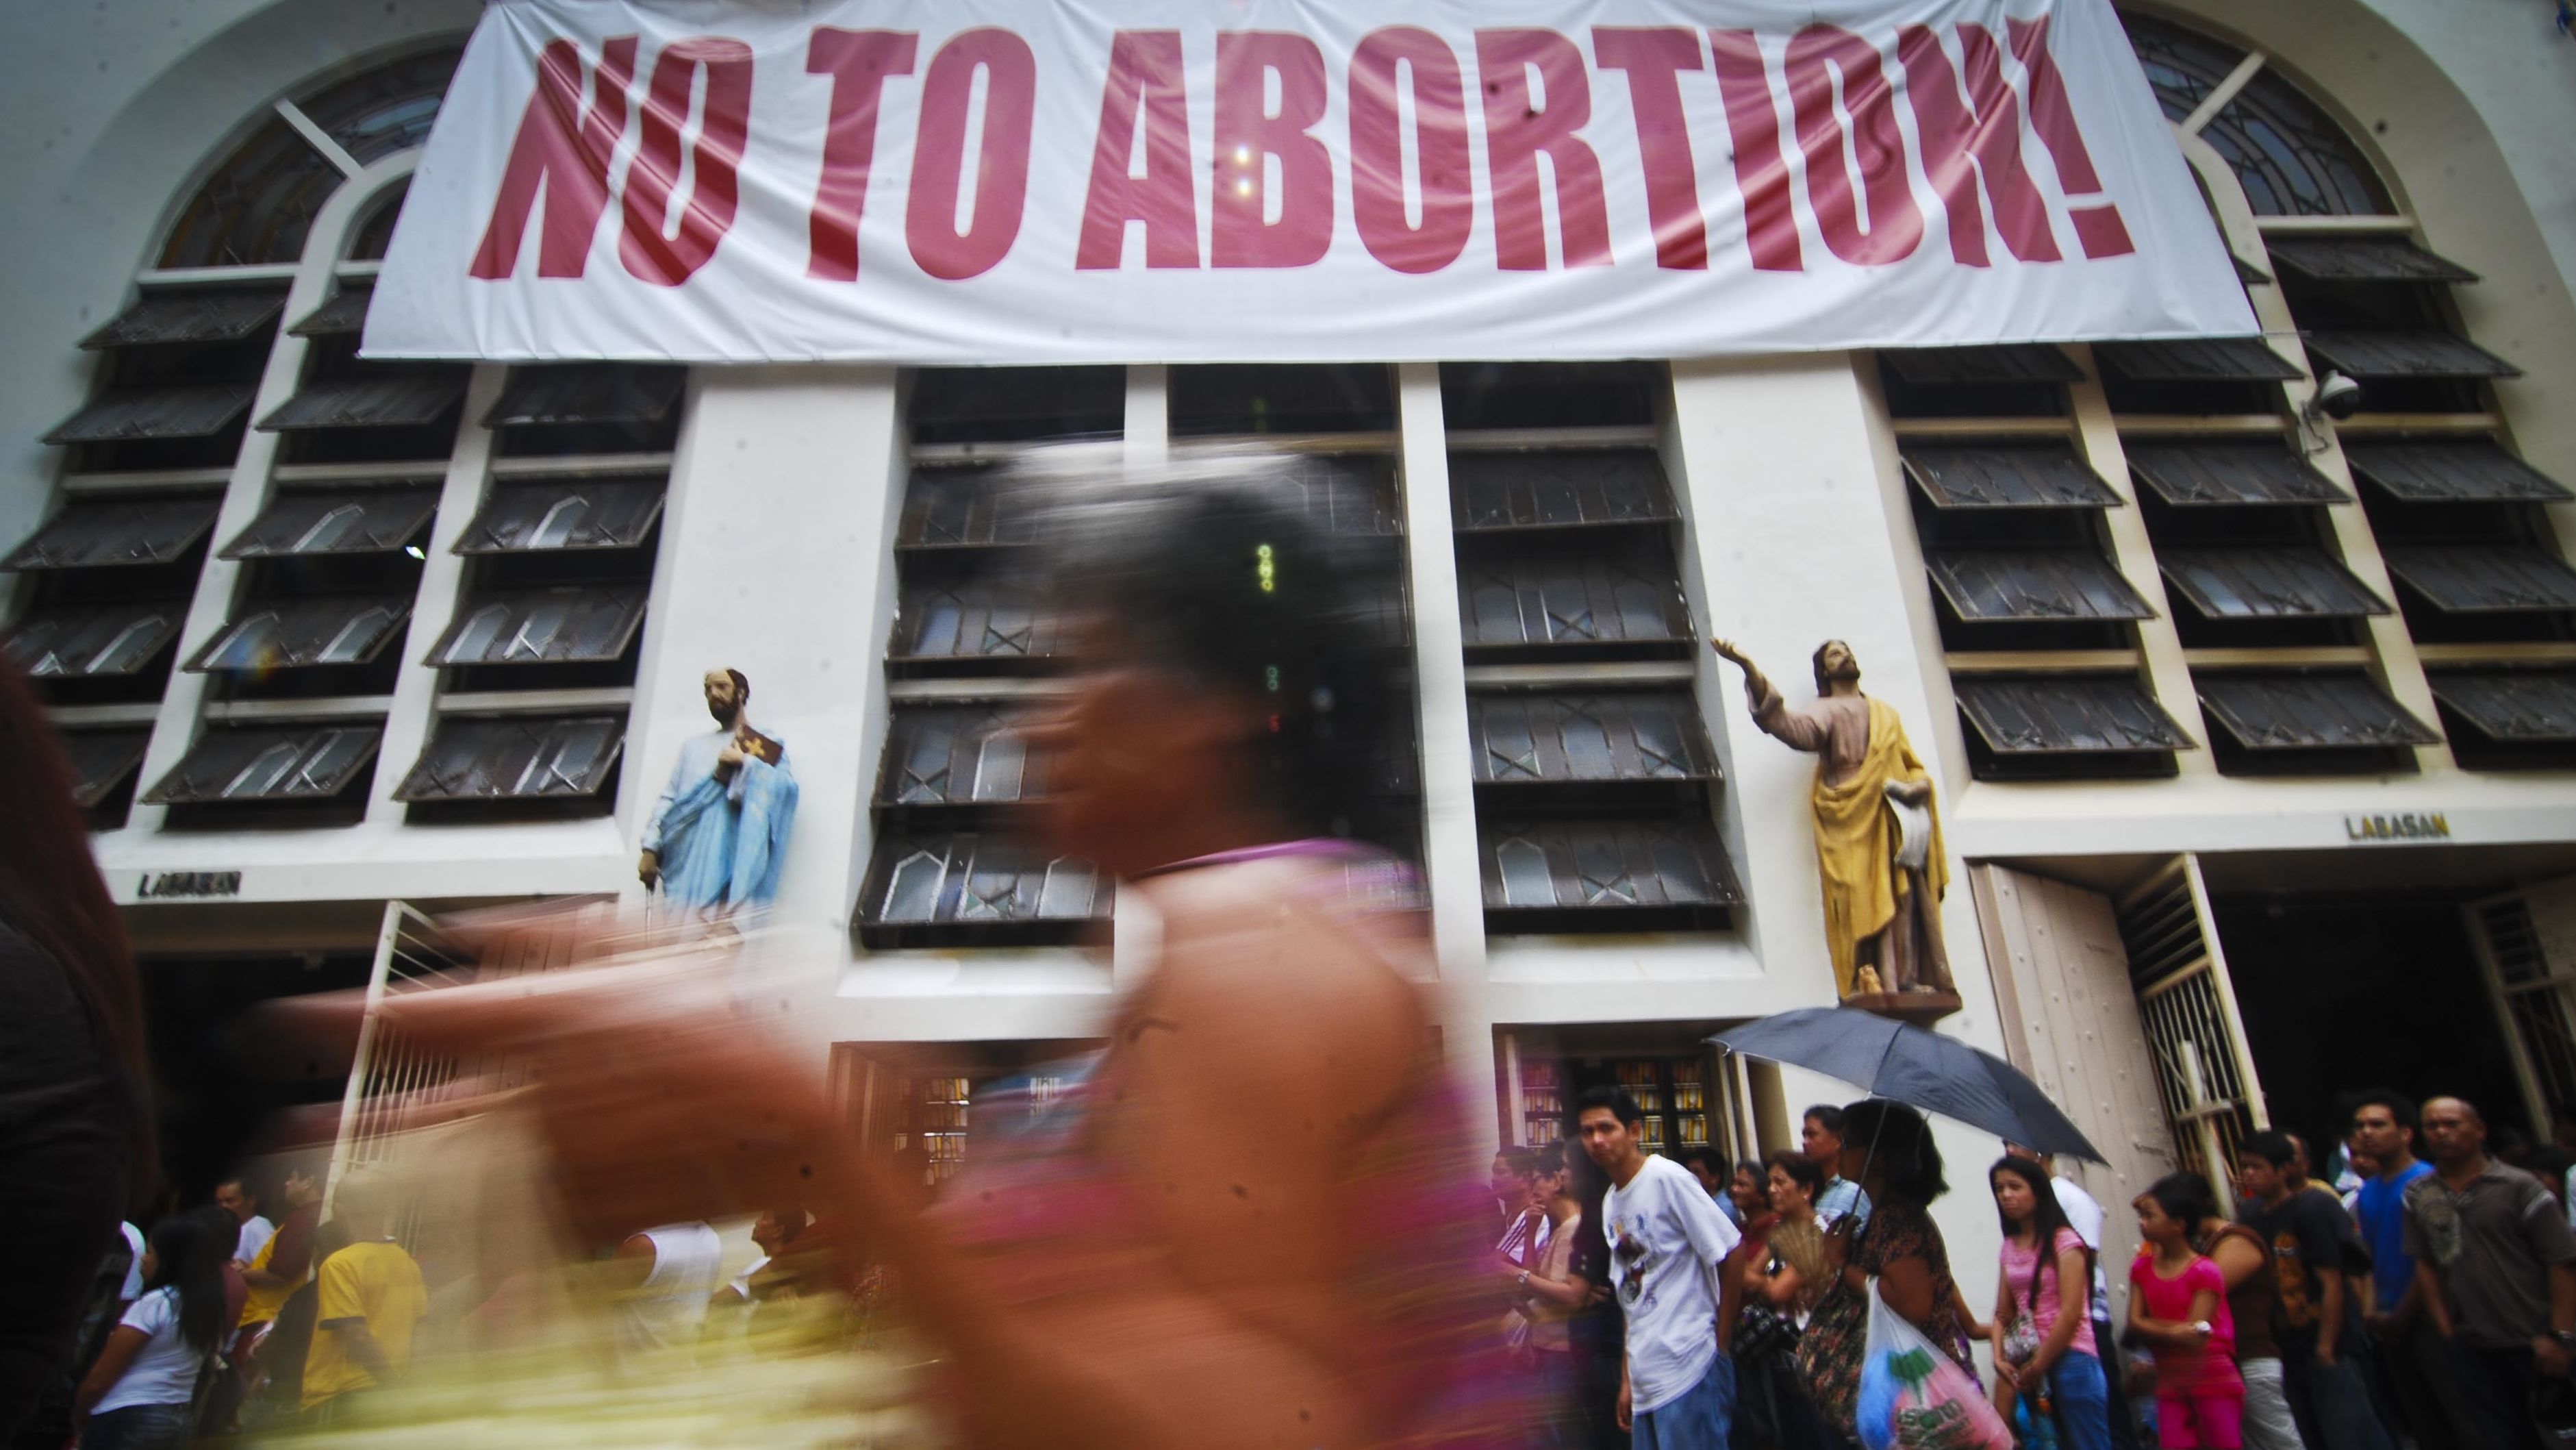 A placard is displayed during an anti-abortion rally in Manila.